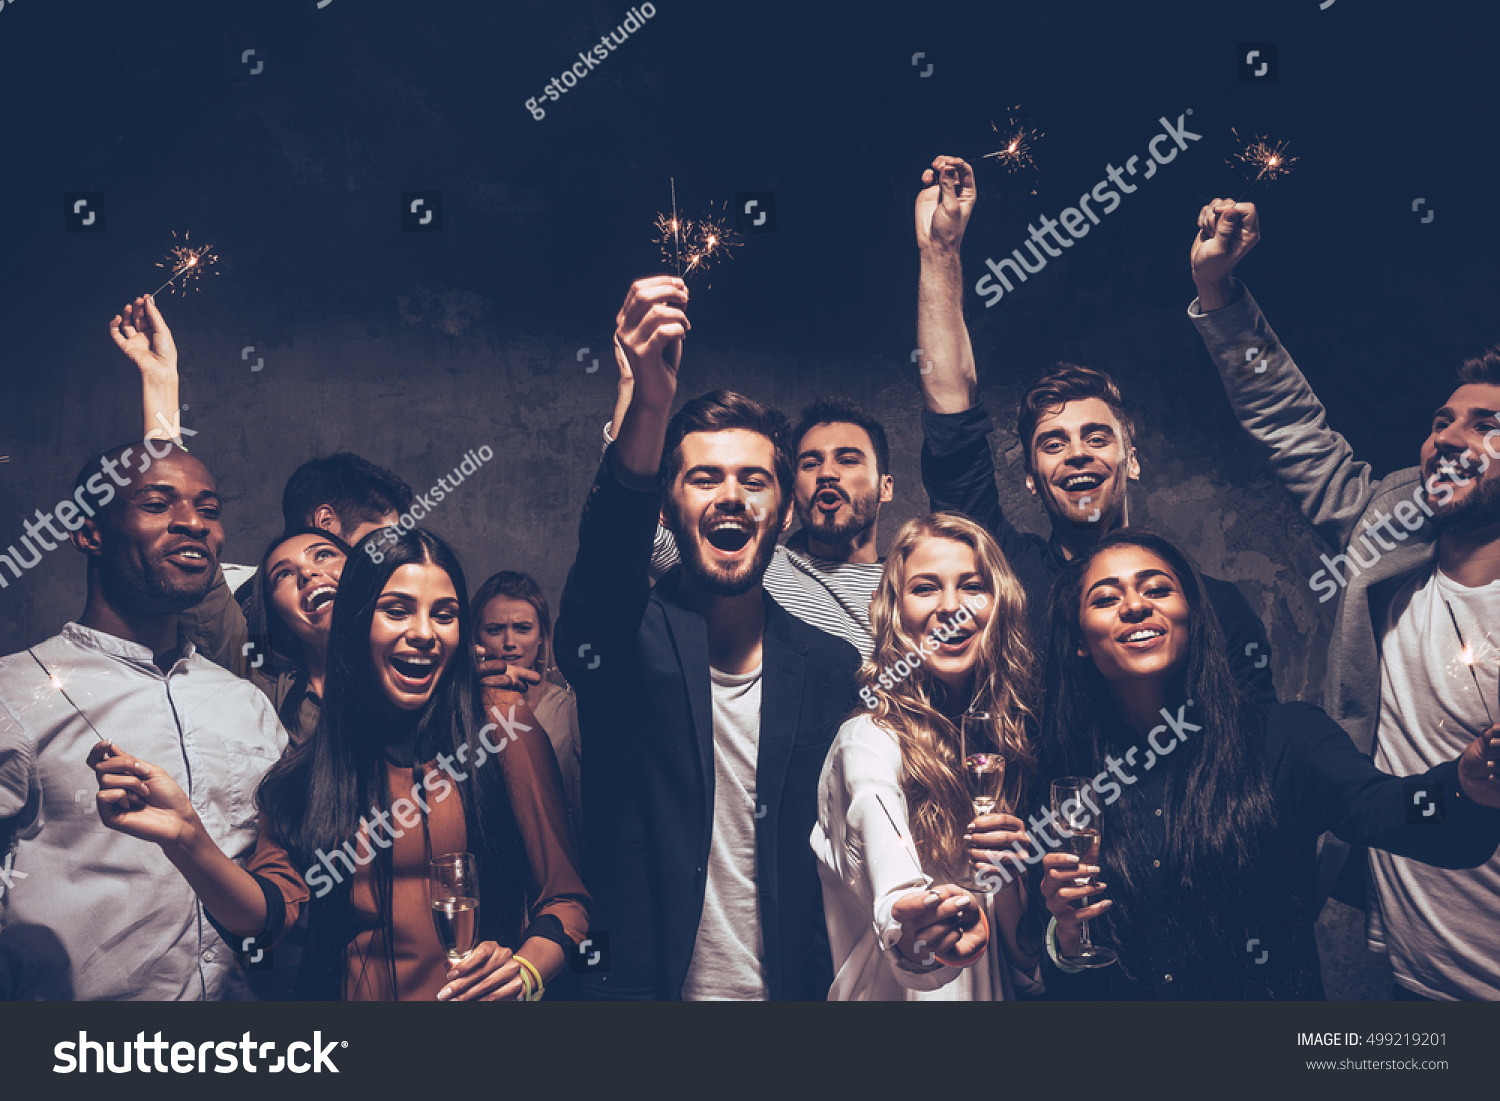 Party with friends. Group of cheerful young people carrying sparklers and champagne flutes #499219201